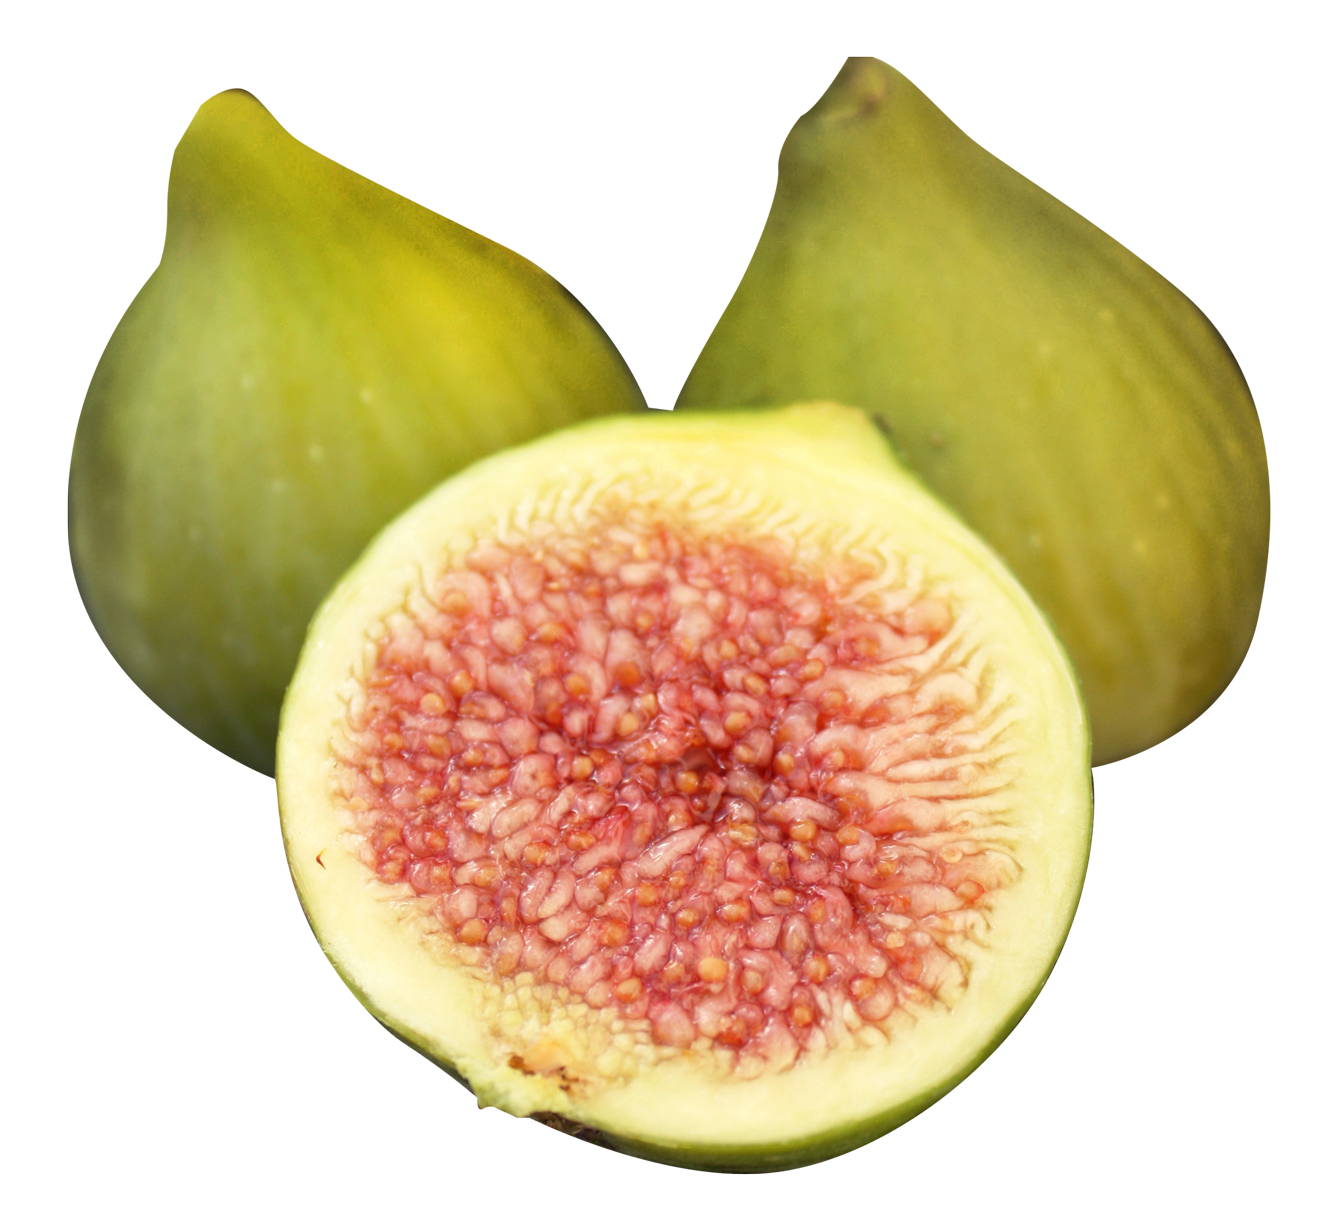 A Figs With A Cut In Half